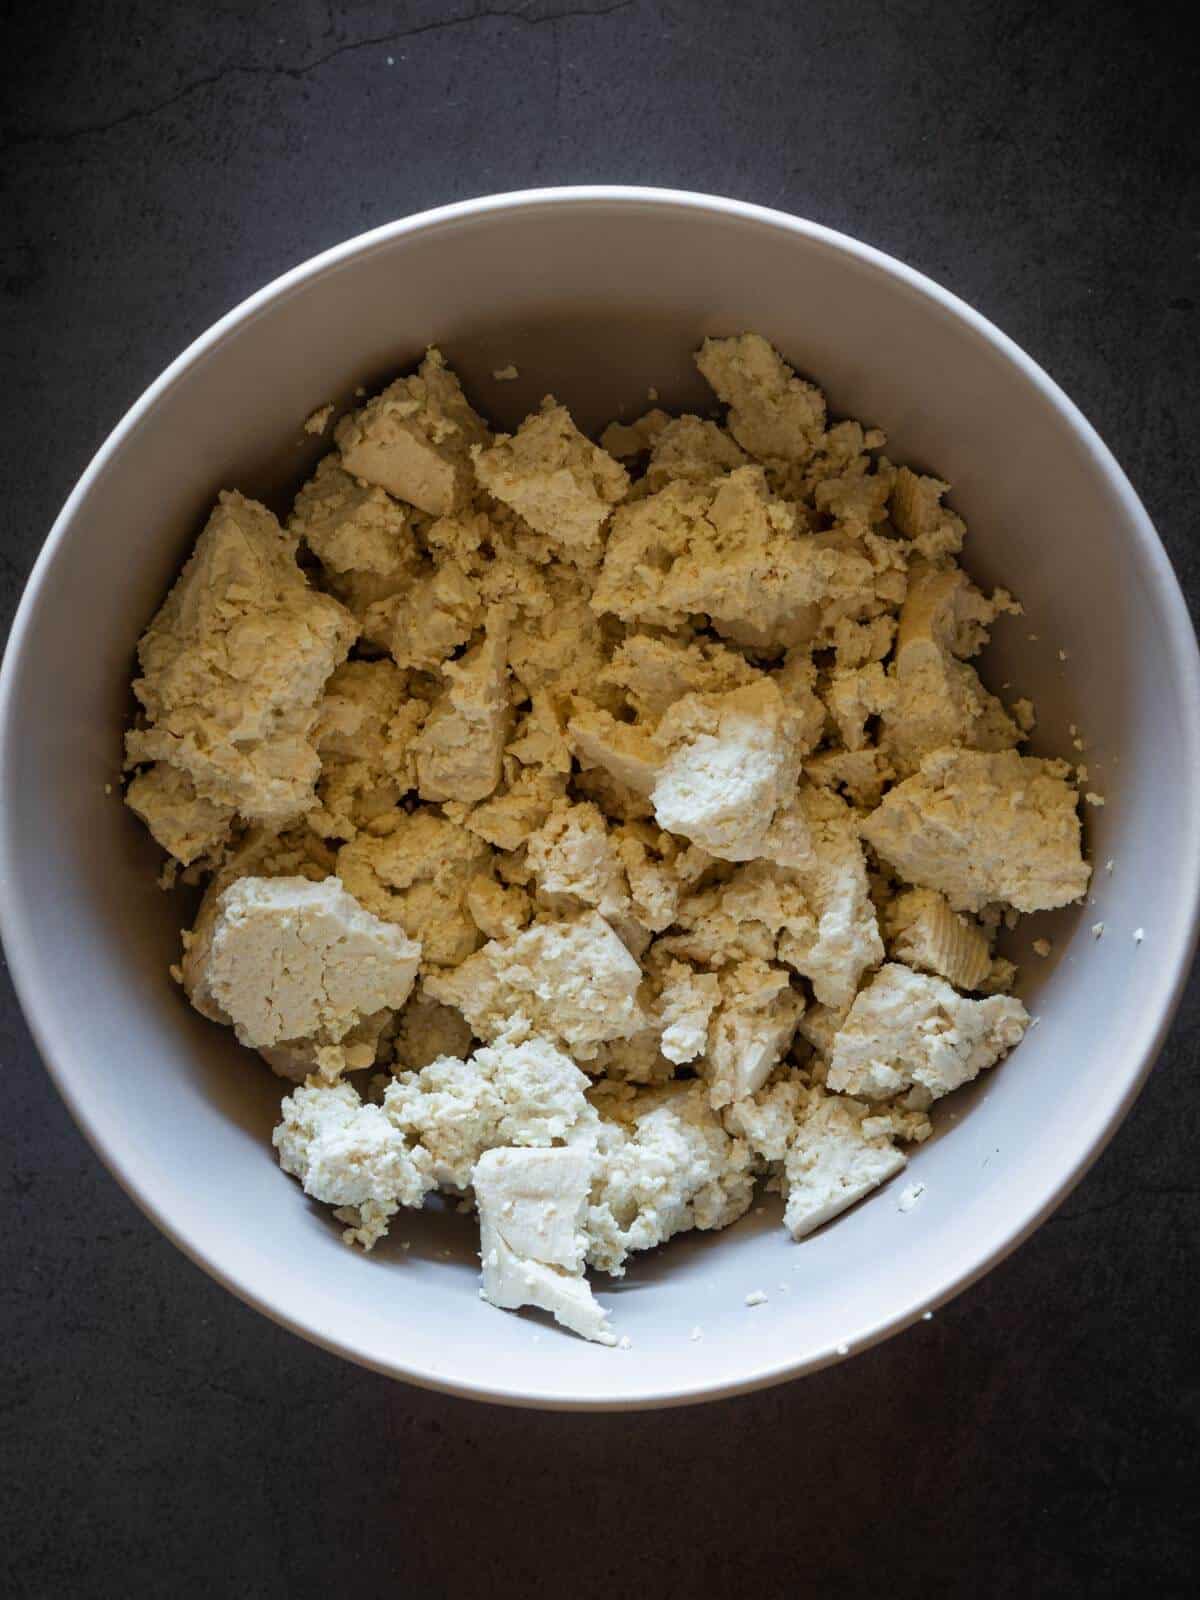 coarsely crumbled extra-firm tofu